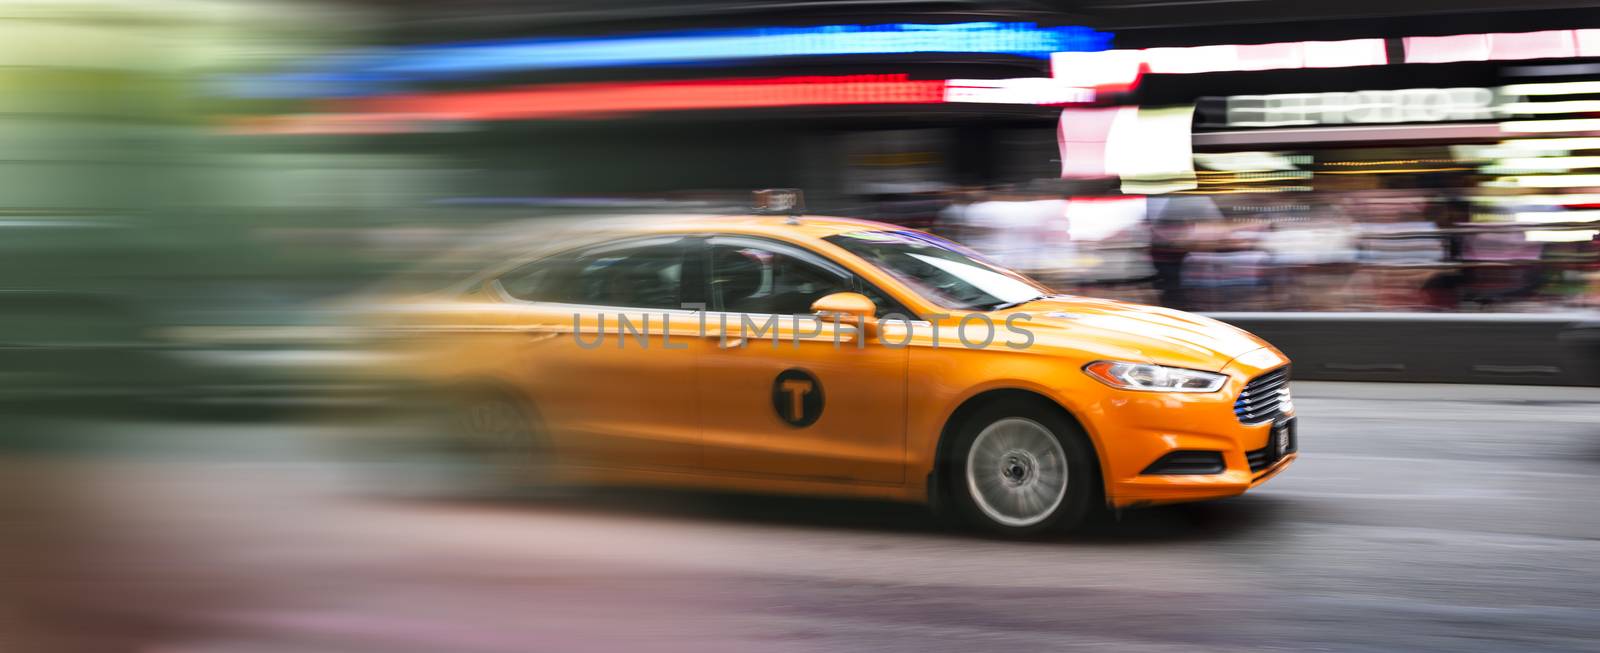 speedy taxi in Times square New York city, USA